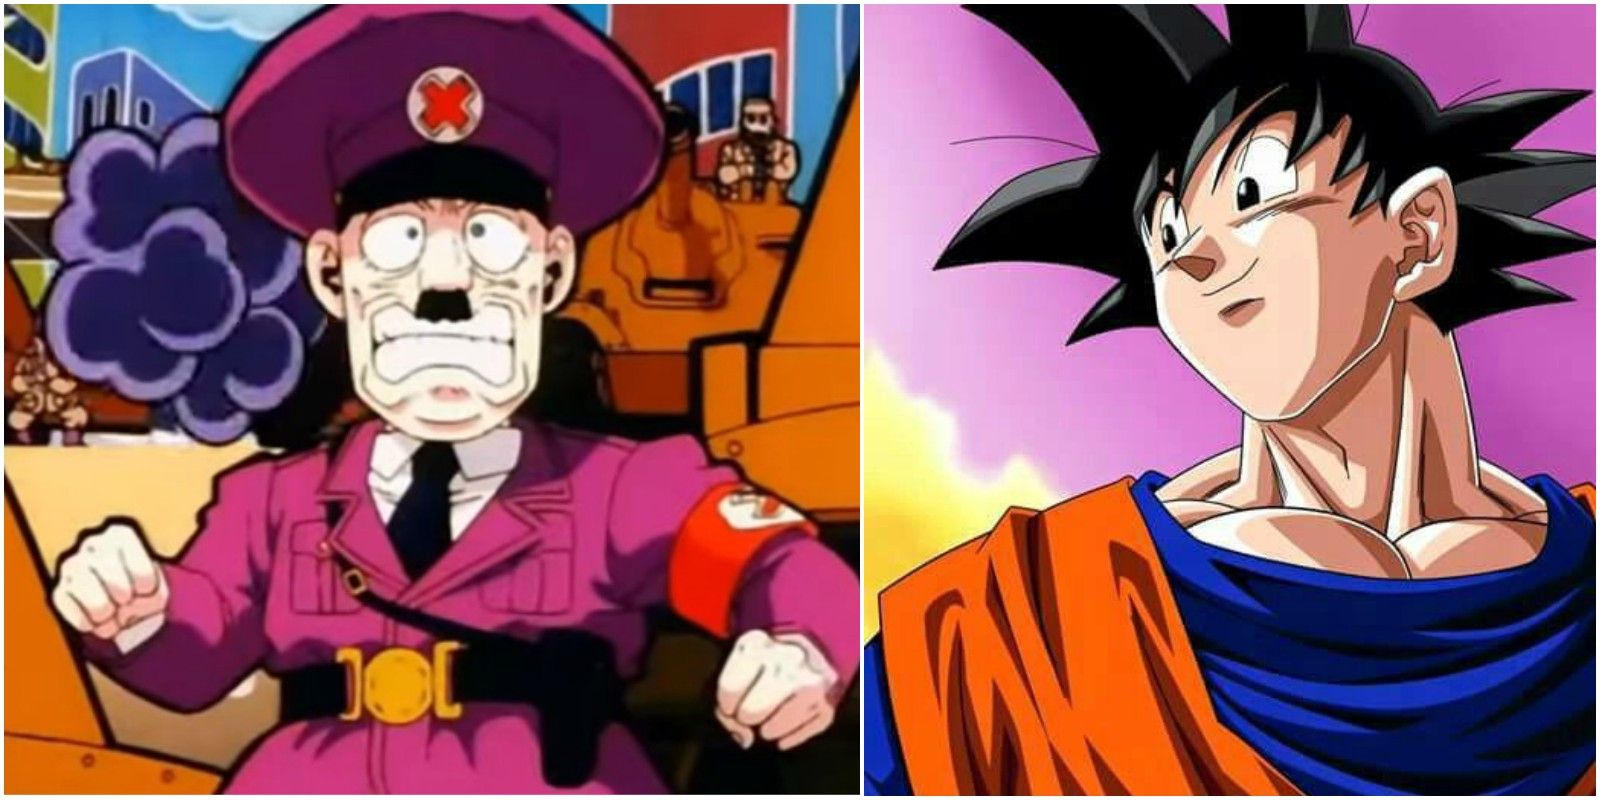 10 Things You Didn't Know About Dragon Ball